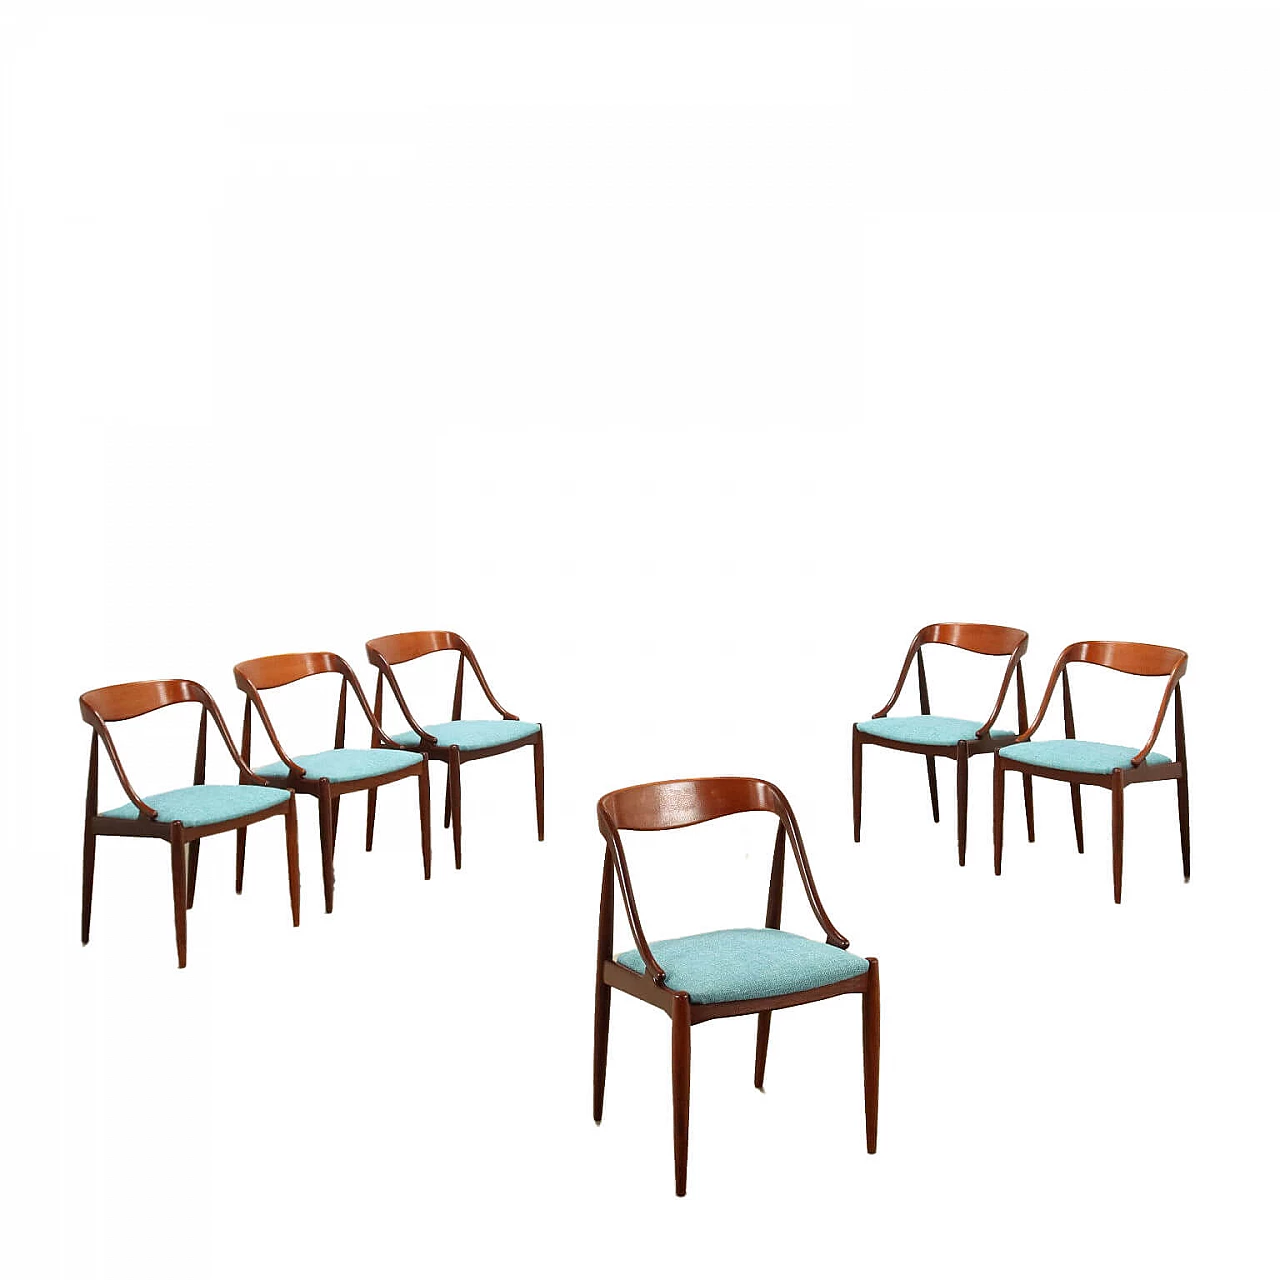 6 Model 16 chairs by Johannes Andersen for Uldum Furniture Factory, 1960s 1